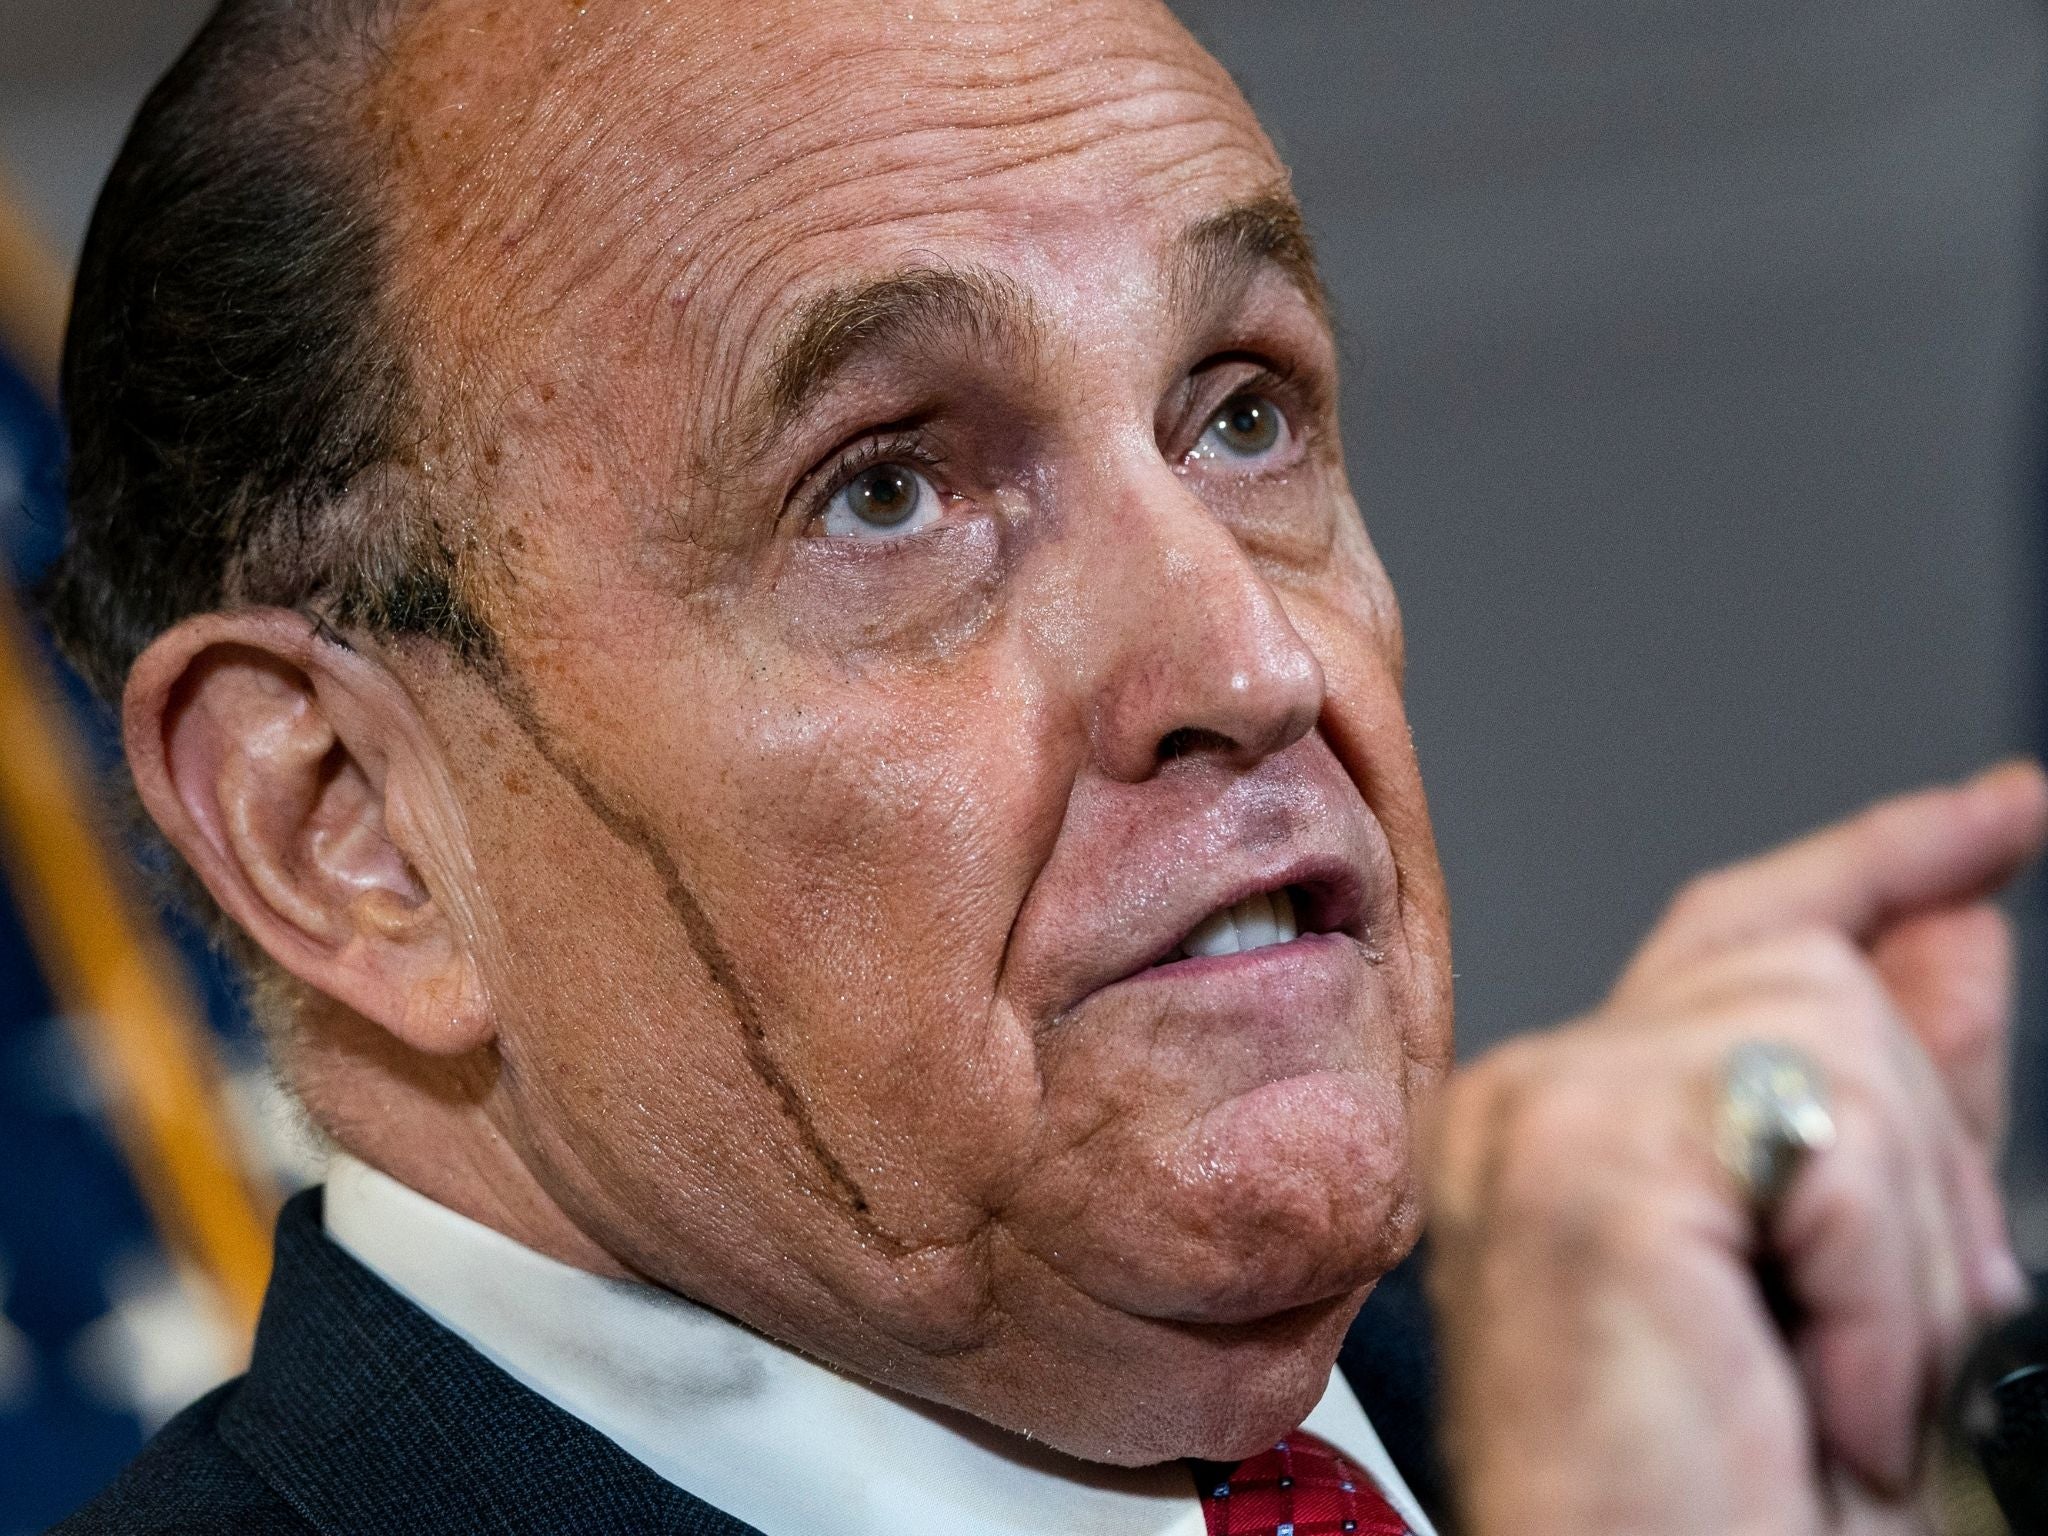 Bad hair day: Giuliani at a recent press conference